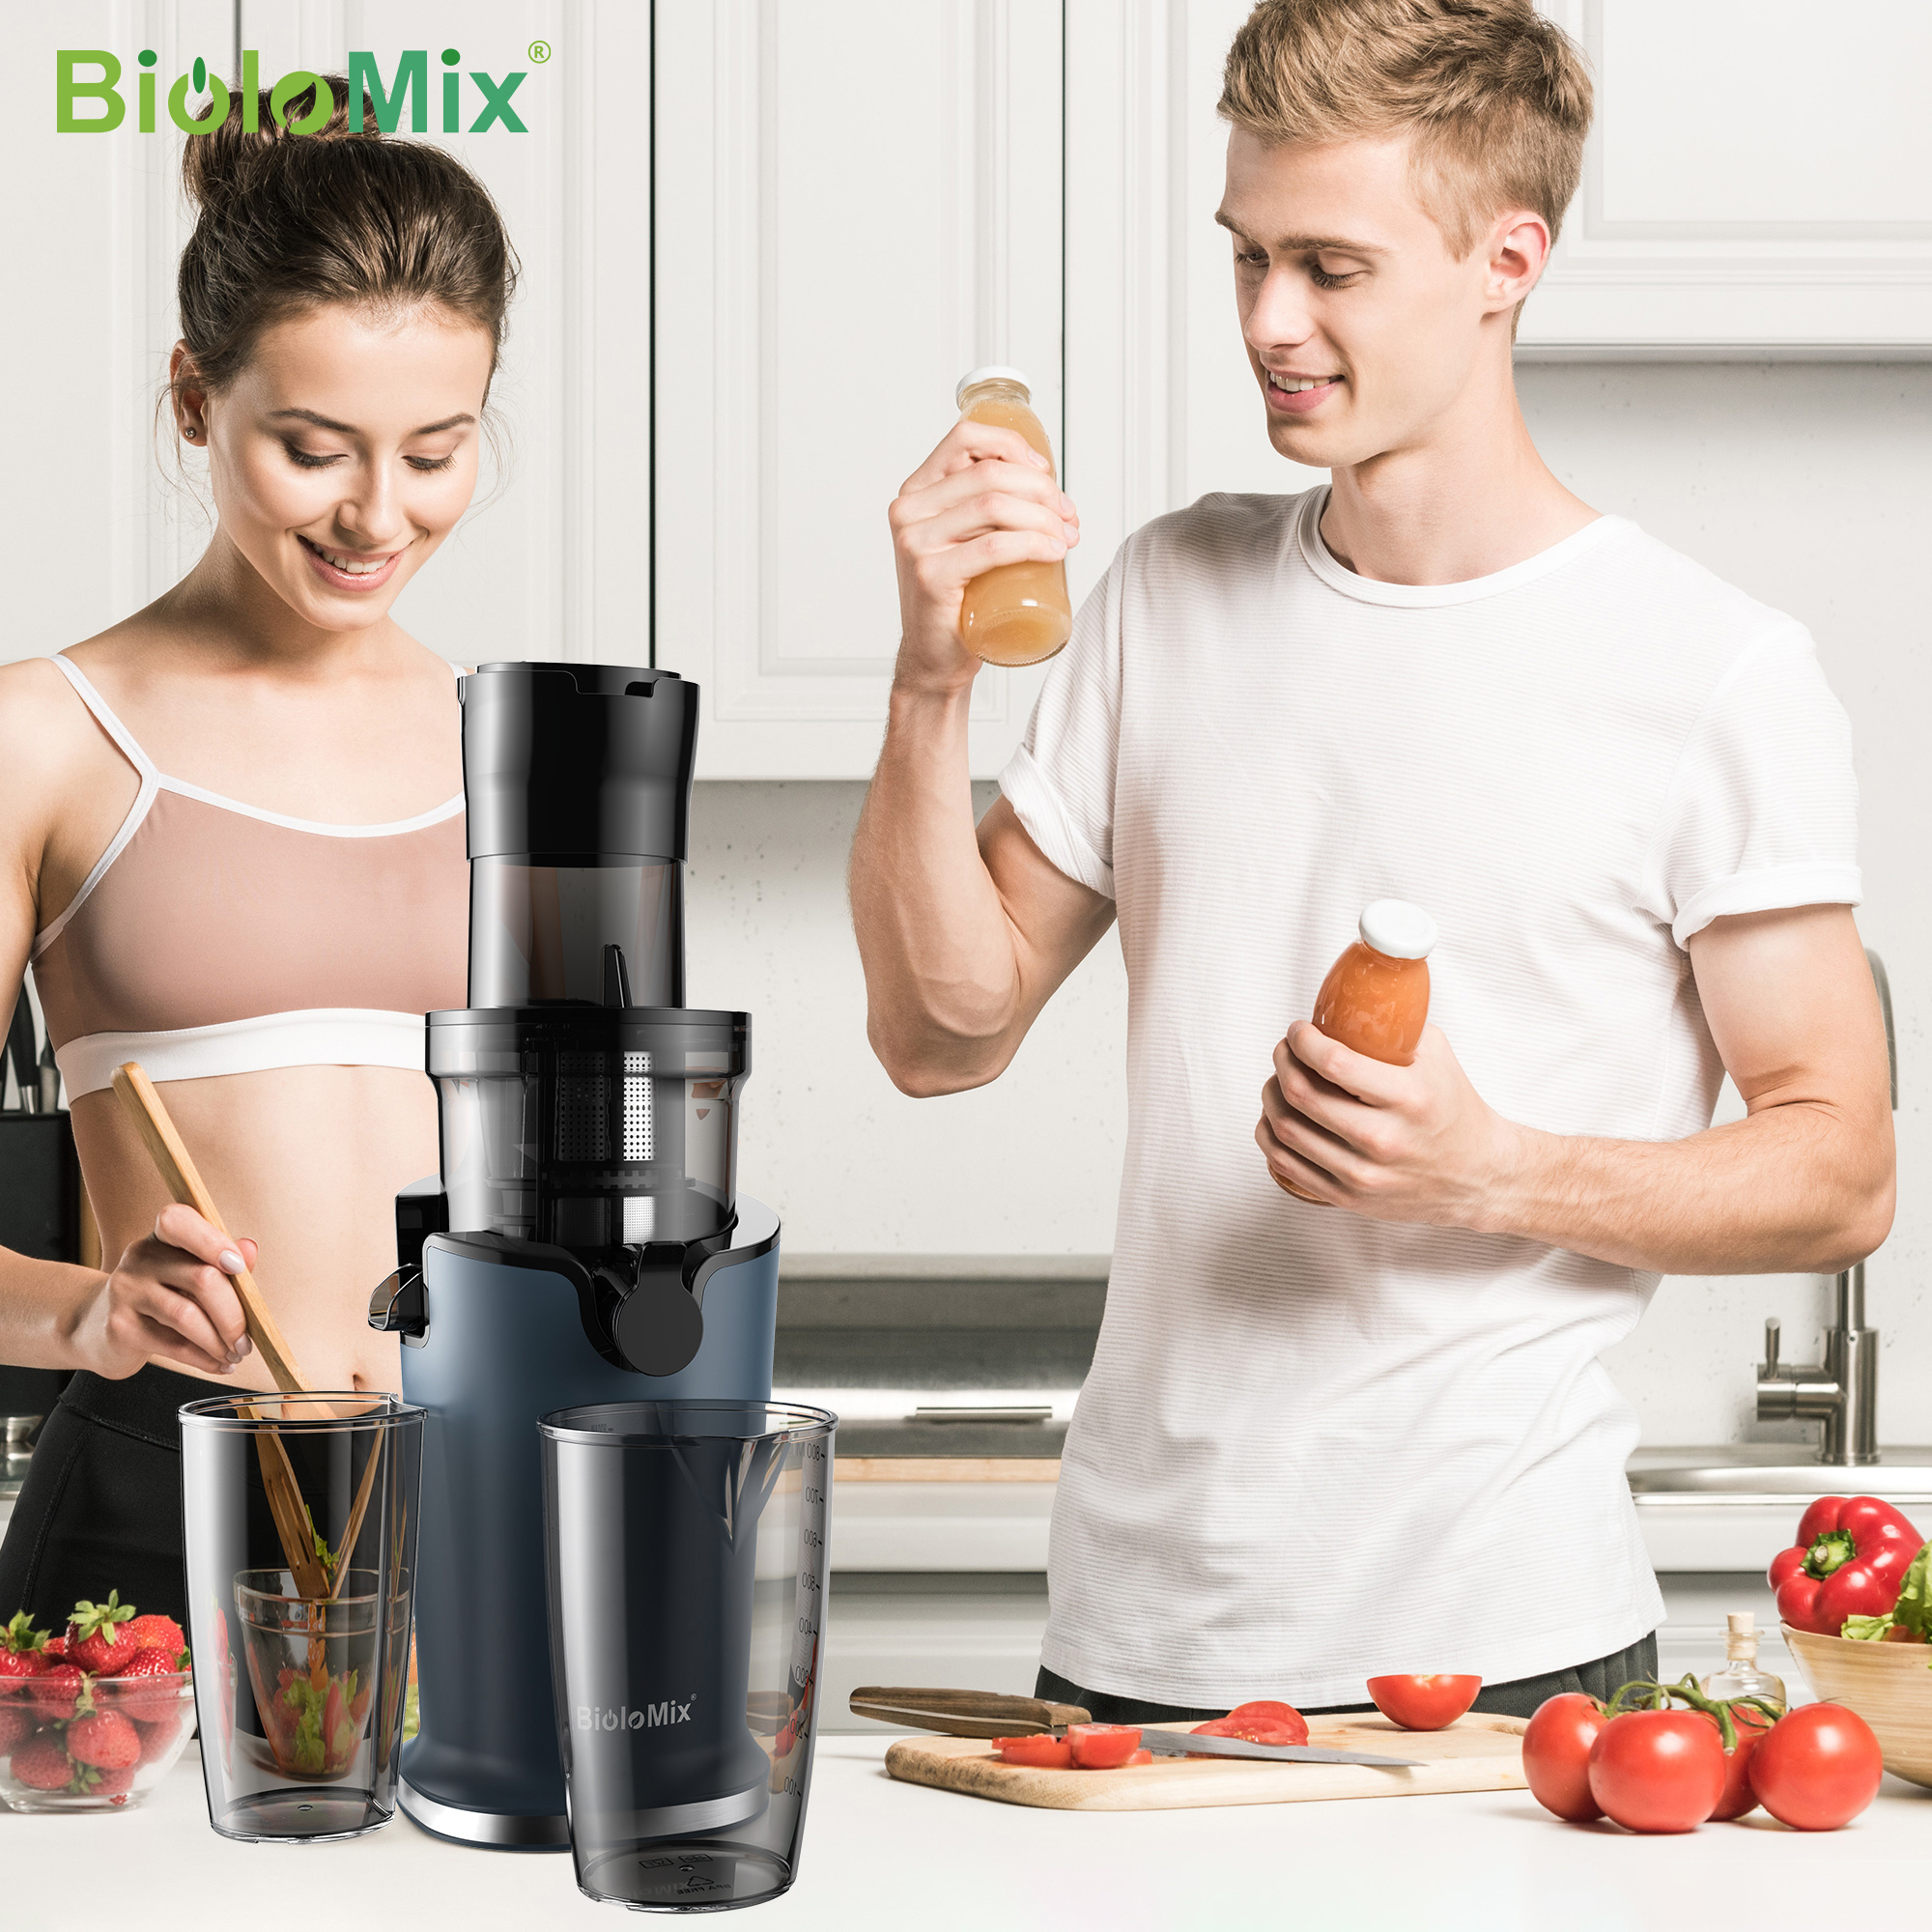 biolomix 200w cold press juicer with 3 07in feed chute tritan material slow juicer machines heavy duty masticating juice extractor fits whole fruits veggies easy to clean details 8